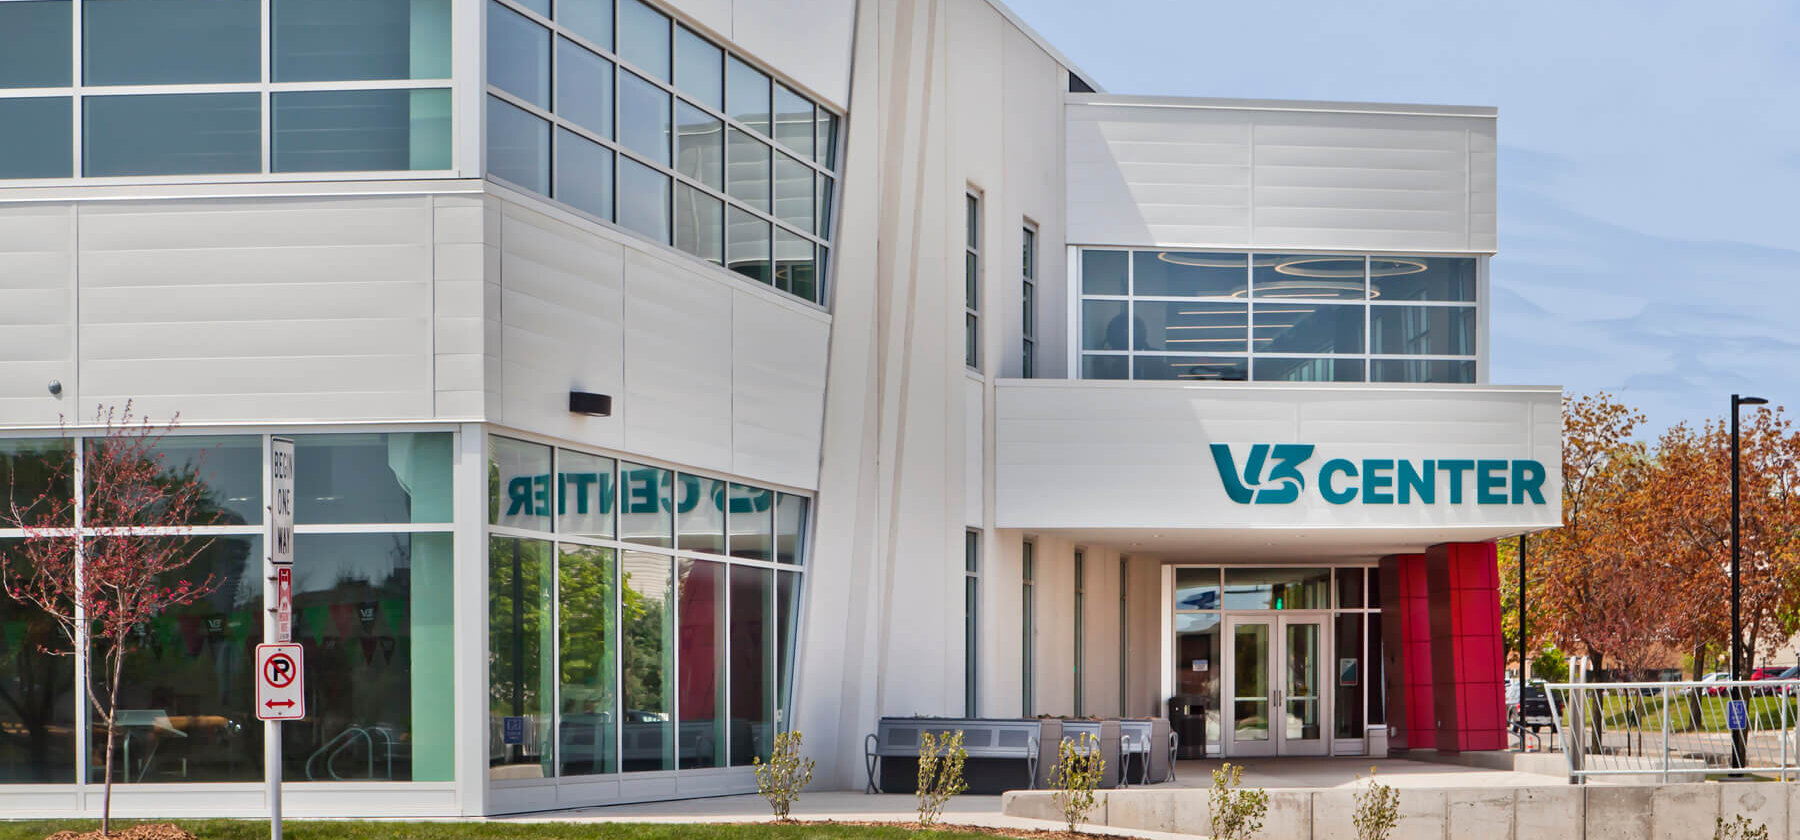 An exterior shot of the V3 Sports Center in Minneapolis.